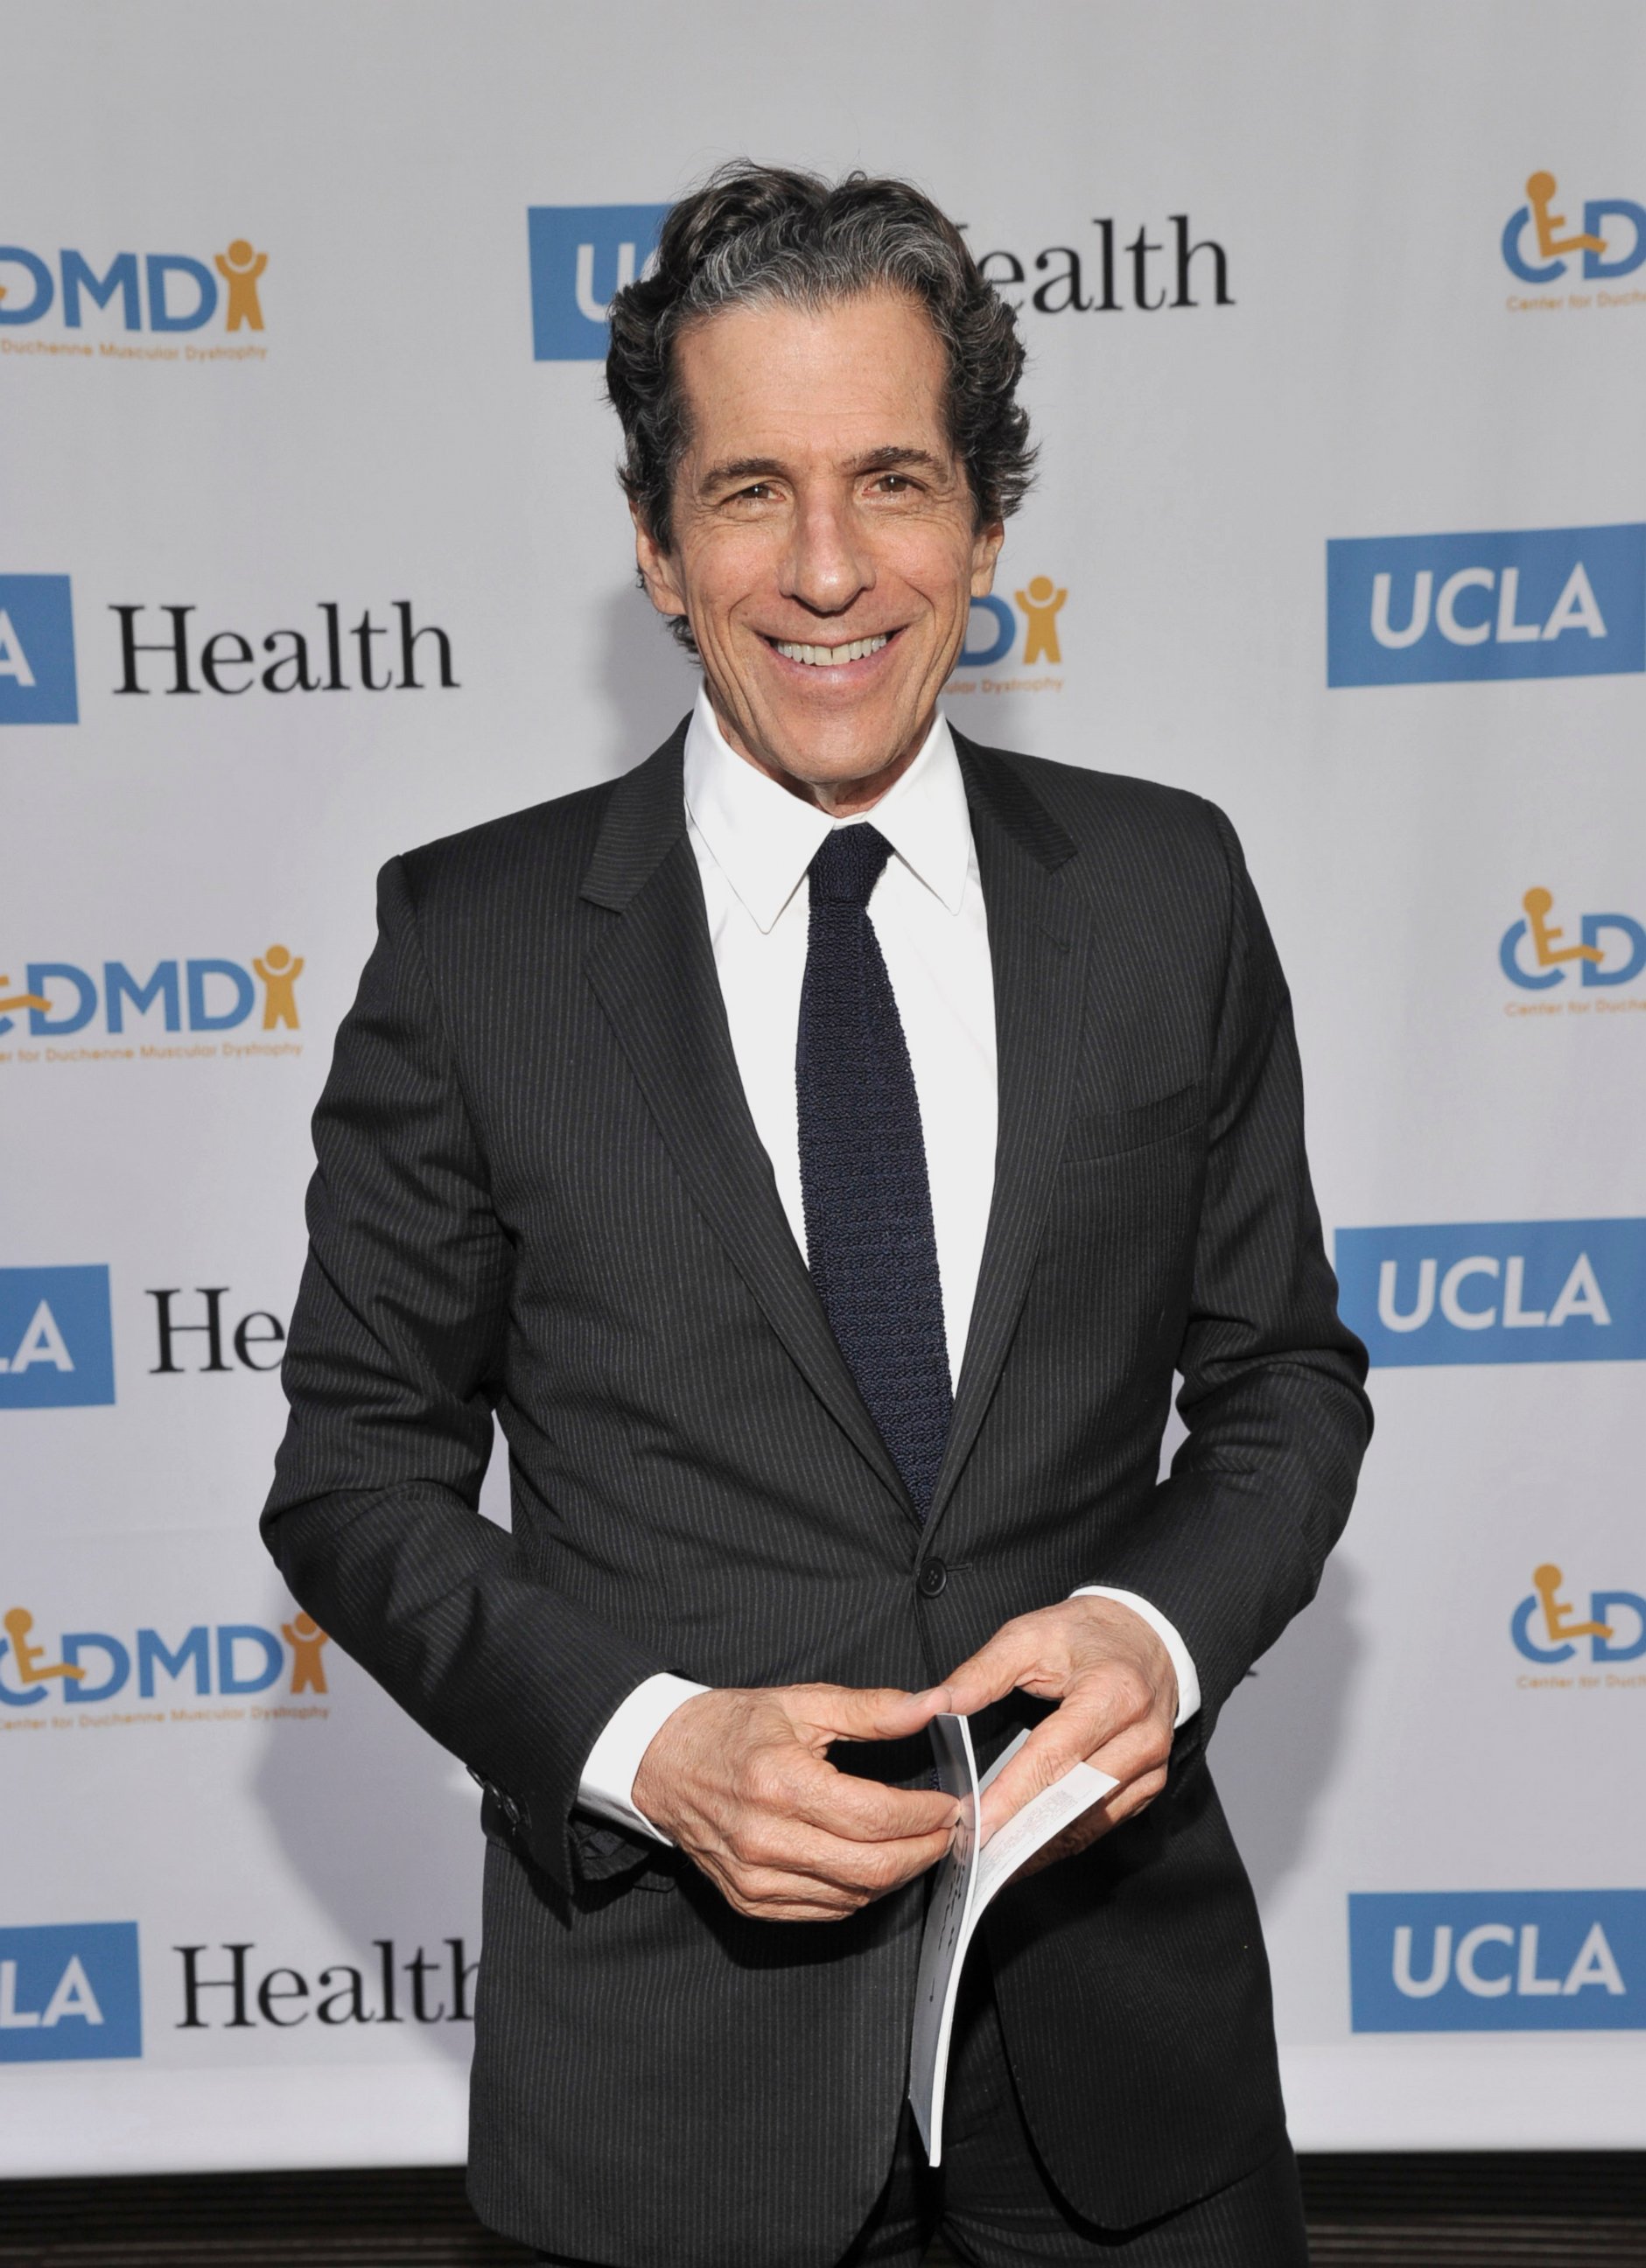 PHOTO: Philathropist Peter Morton attends the 7th Annual Dealing For Duchenne Gala  at the Sony Pictures Studios, May 10, 2014, in Culver City, Calif.